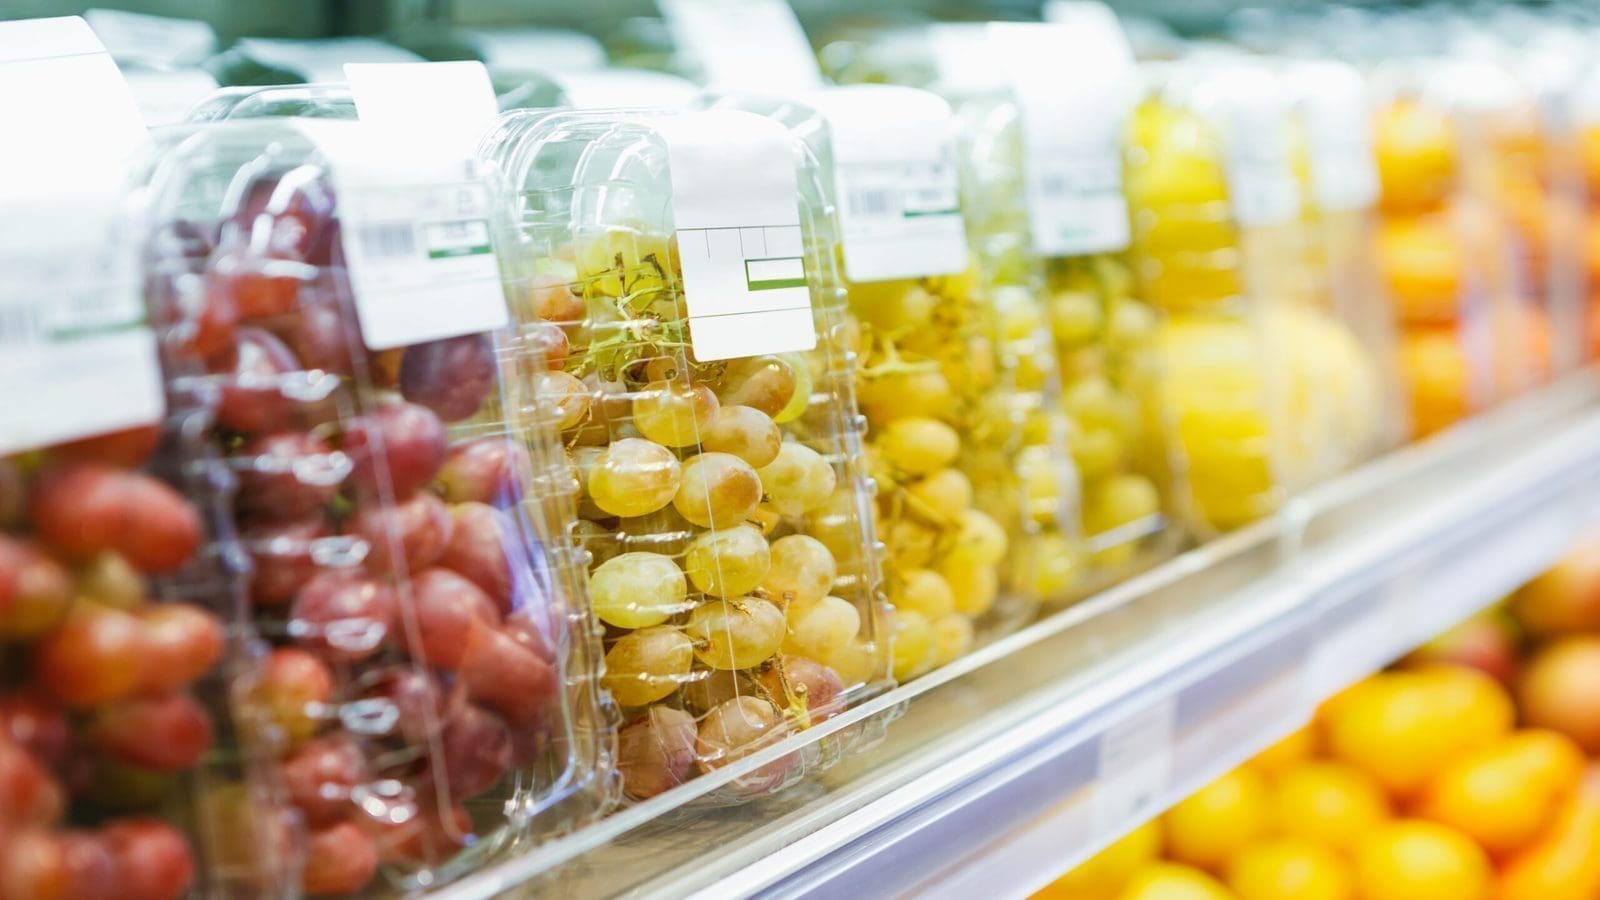 France accelerates transition to circular economy with new ban on plastic packaging for fruit and vegetables